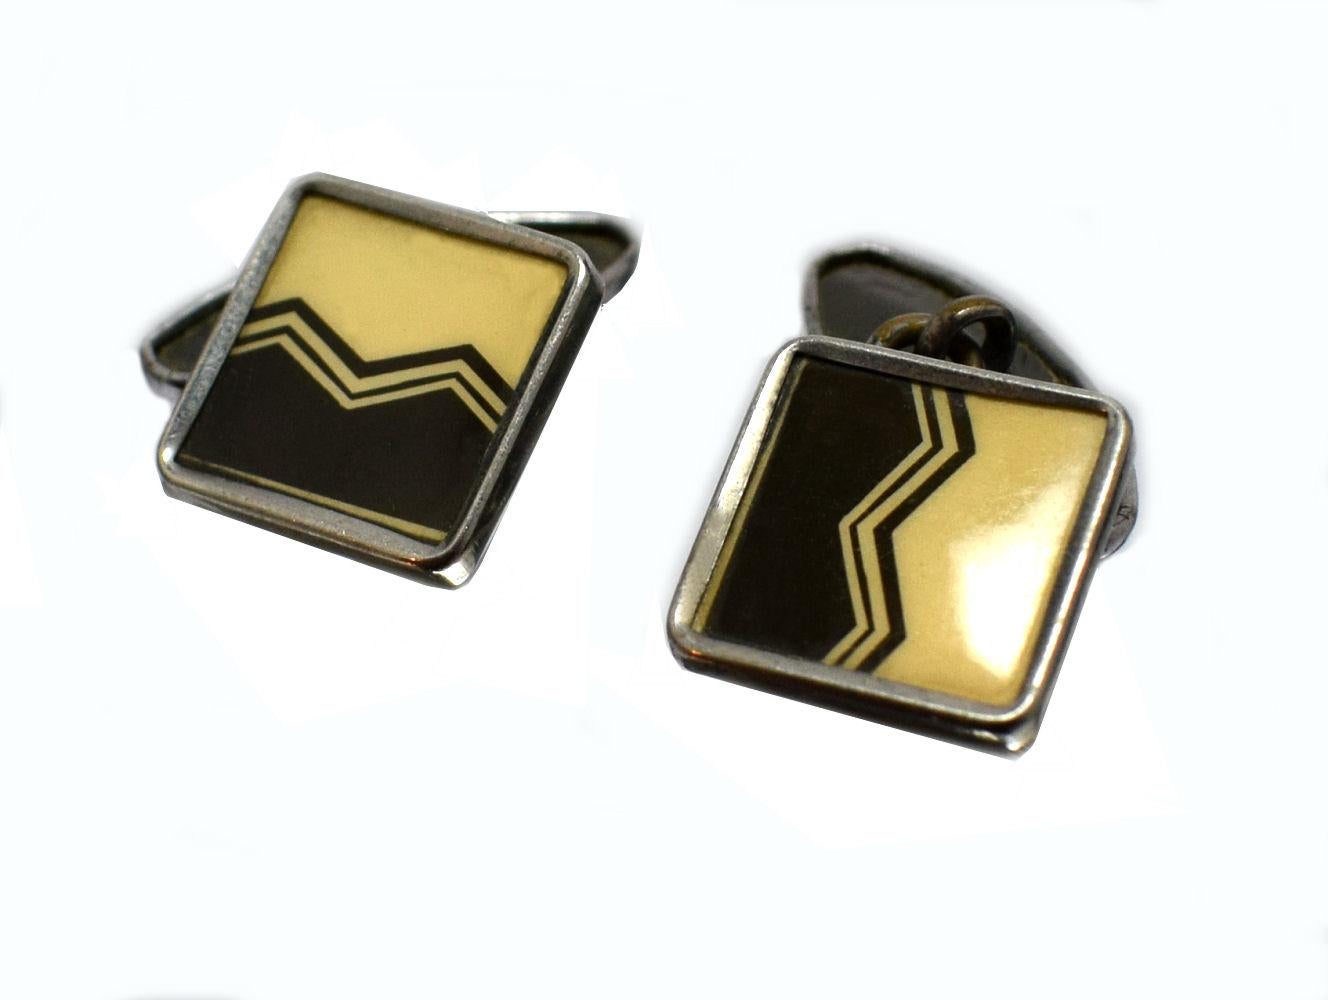 For your consideration is this fabulous pair of English Art Deco cufflinks in chrome and enamel dating to the 1930's. Great styling and colour, can't be confused with any other era can they. Condition is great with only minor wear. Ideal for the